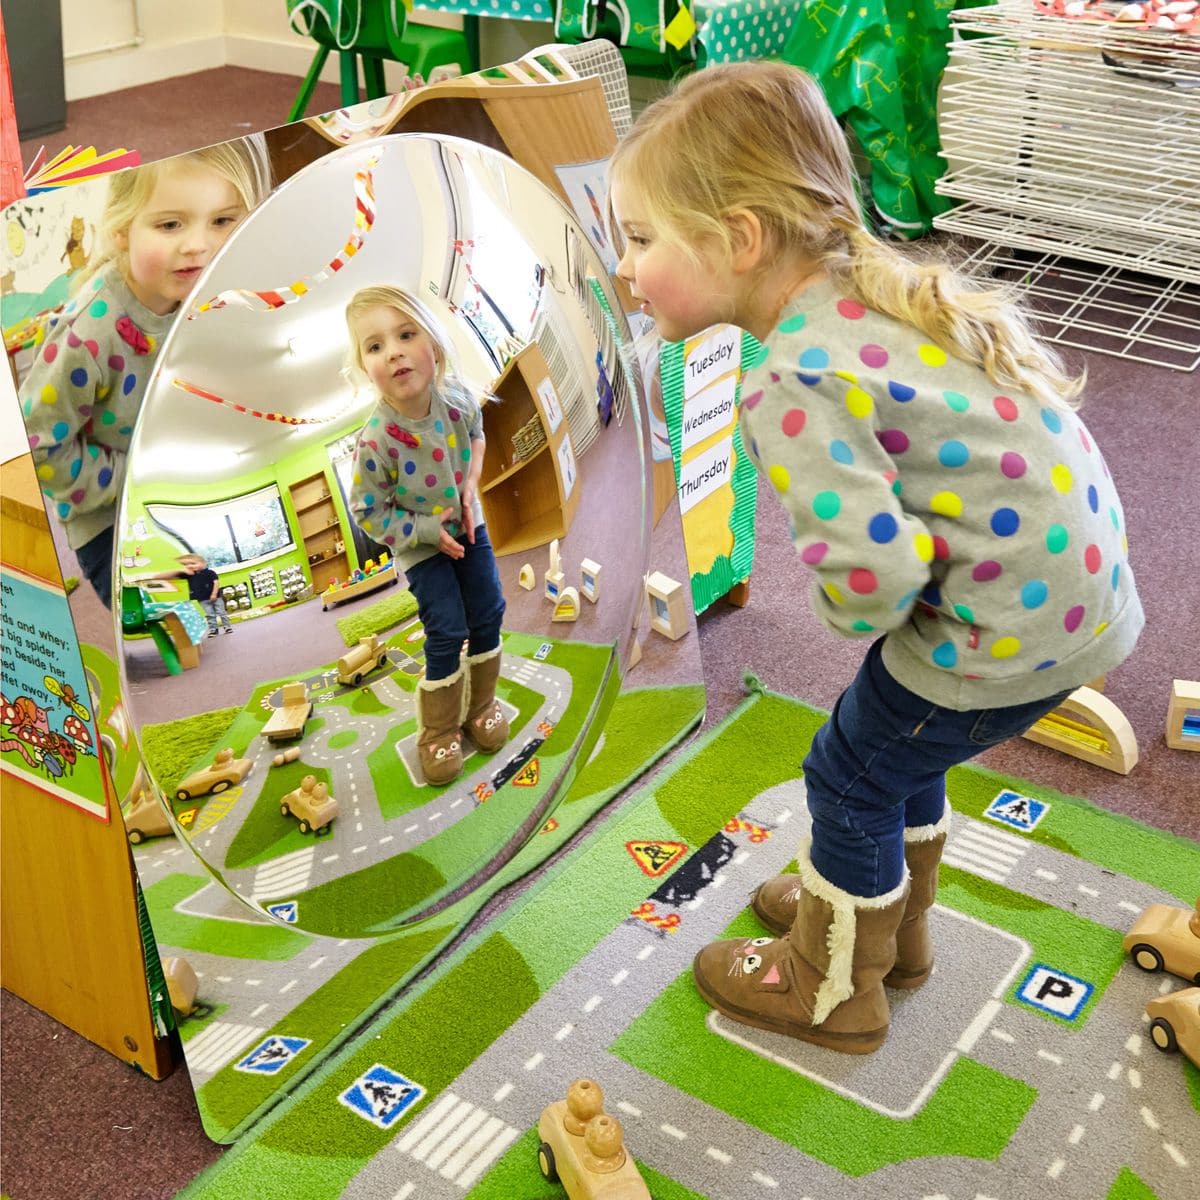 Giant Single Domed Mirror panel, The Giant Single Domed Mirror panel is made from scratch resistant acrylic these mirror panels are safe and ideal for any classroom or nursery setting. Children are drawn to mirrors for the observation of themselves and objects. The Giant Single Domed Mirror panel convex mirror dome provides a distorted, fun and interesting view of the world for children to explore. They can be sited indoor or outdoor and come with sticky pads and corner fixing brackets for attachment to any